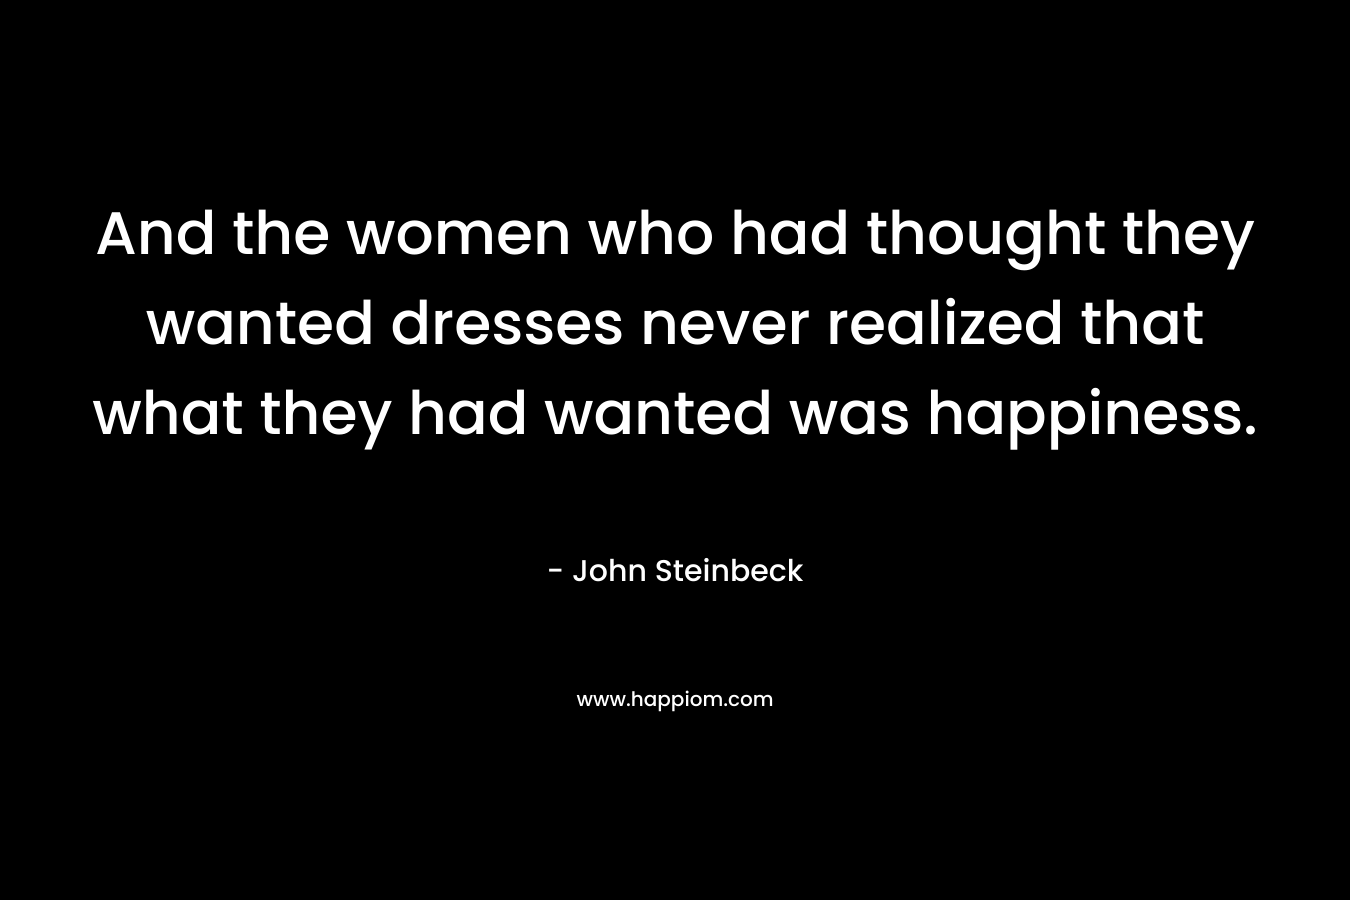 And the women who had thought they wanted dresses never realized that what they had wanted was happiness.